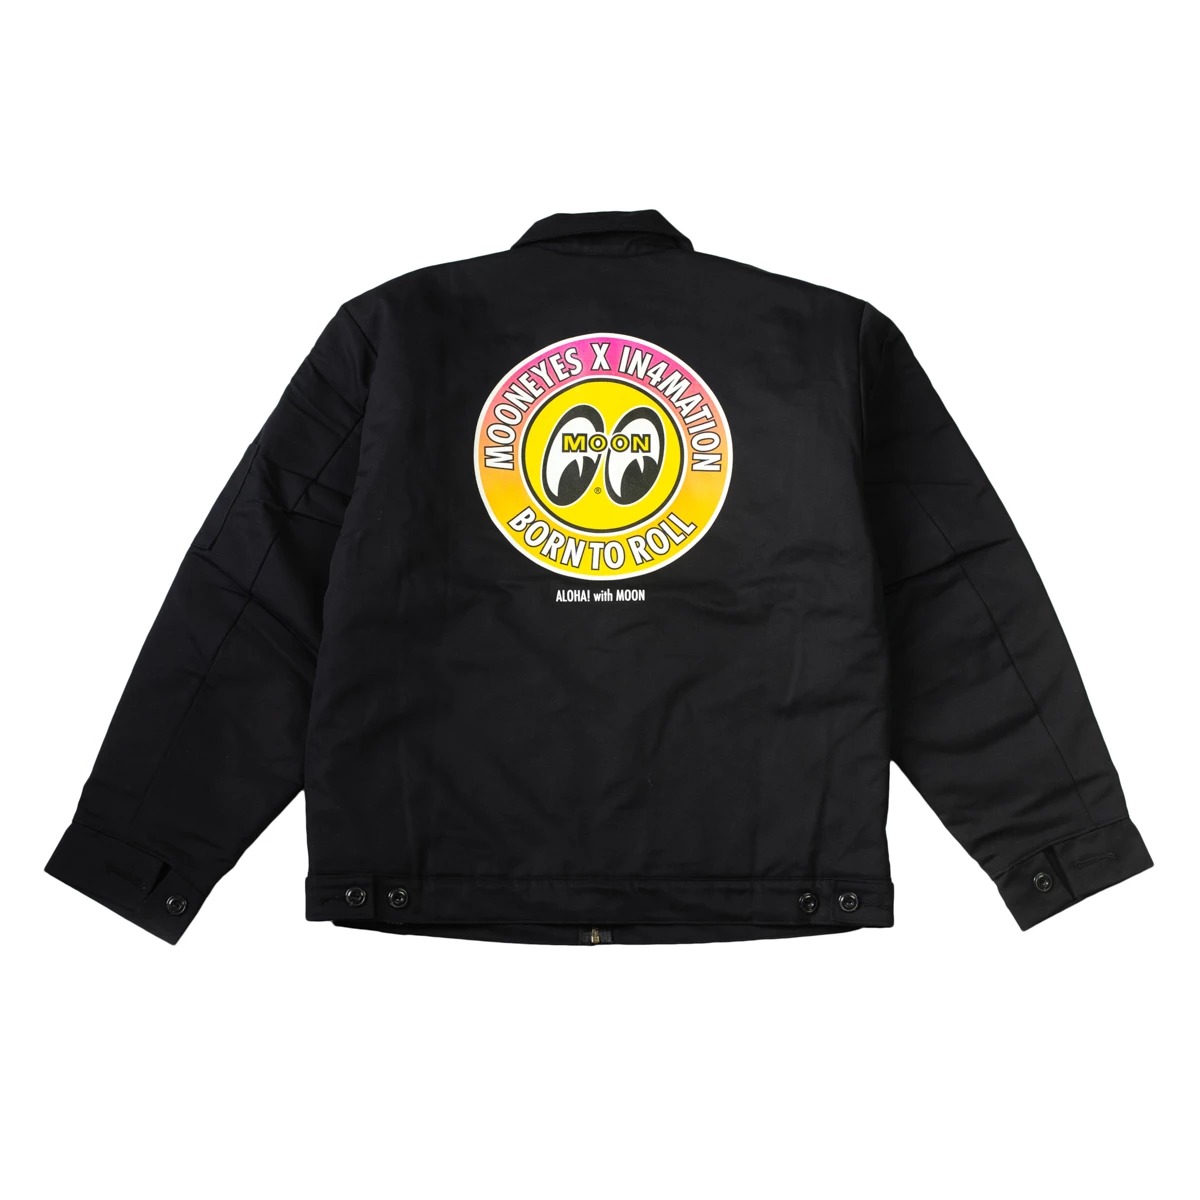 in4mation x MOONEYES Born to Roll Jacket